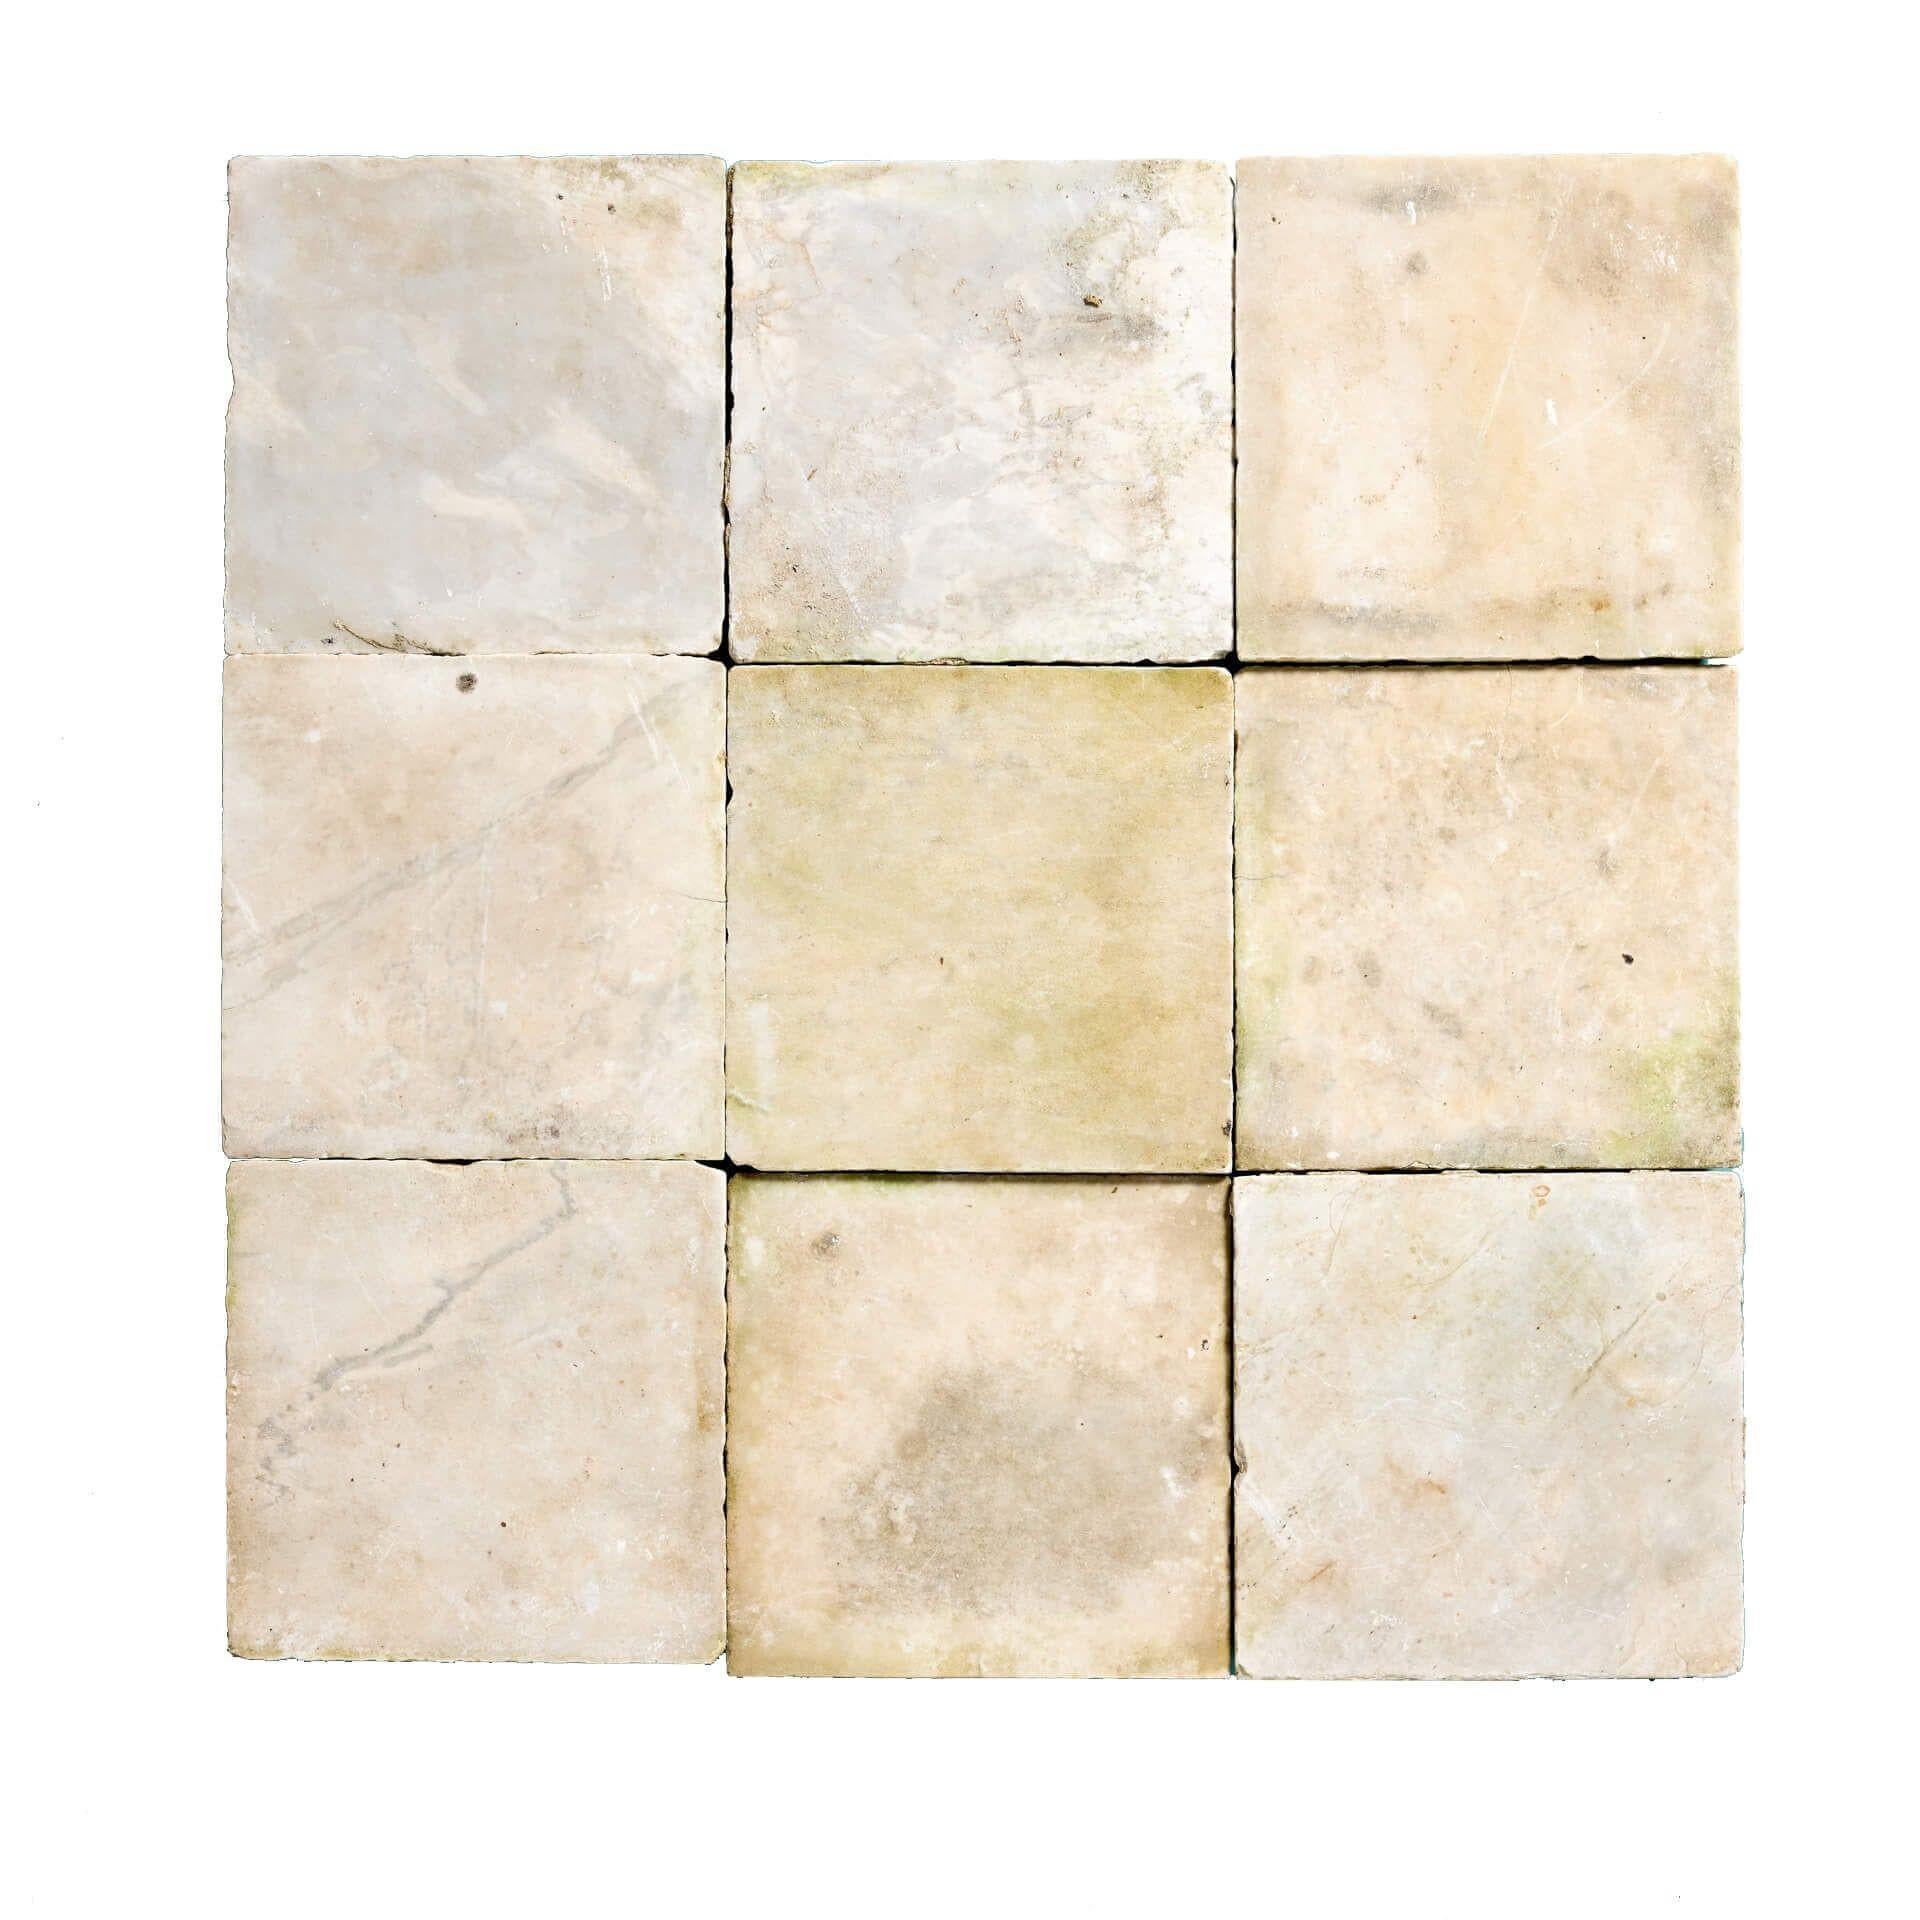 These late 19th century reclaimed Italian floor tiles in Carrara marble were salvaged from Wingfield castle in England.

Dating from circa 1880, these reclaimed tiles are of a Italianate style, made in smooth Carrara marble, and detailed with subtle